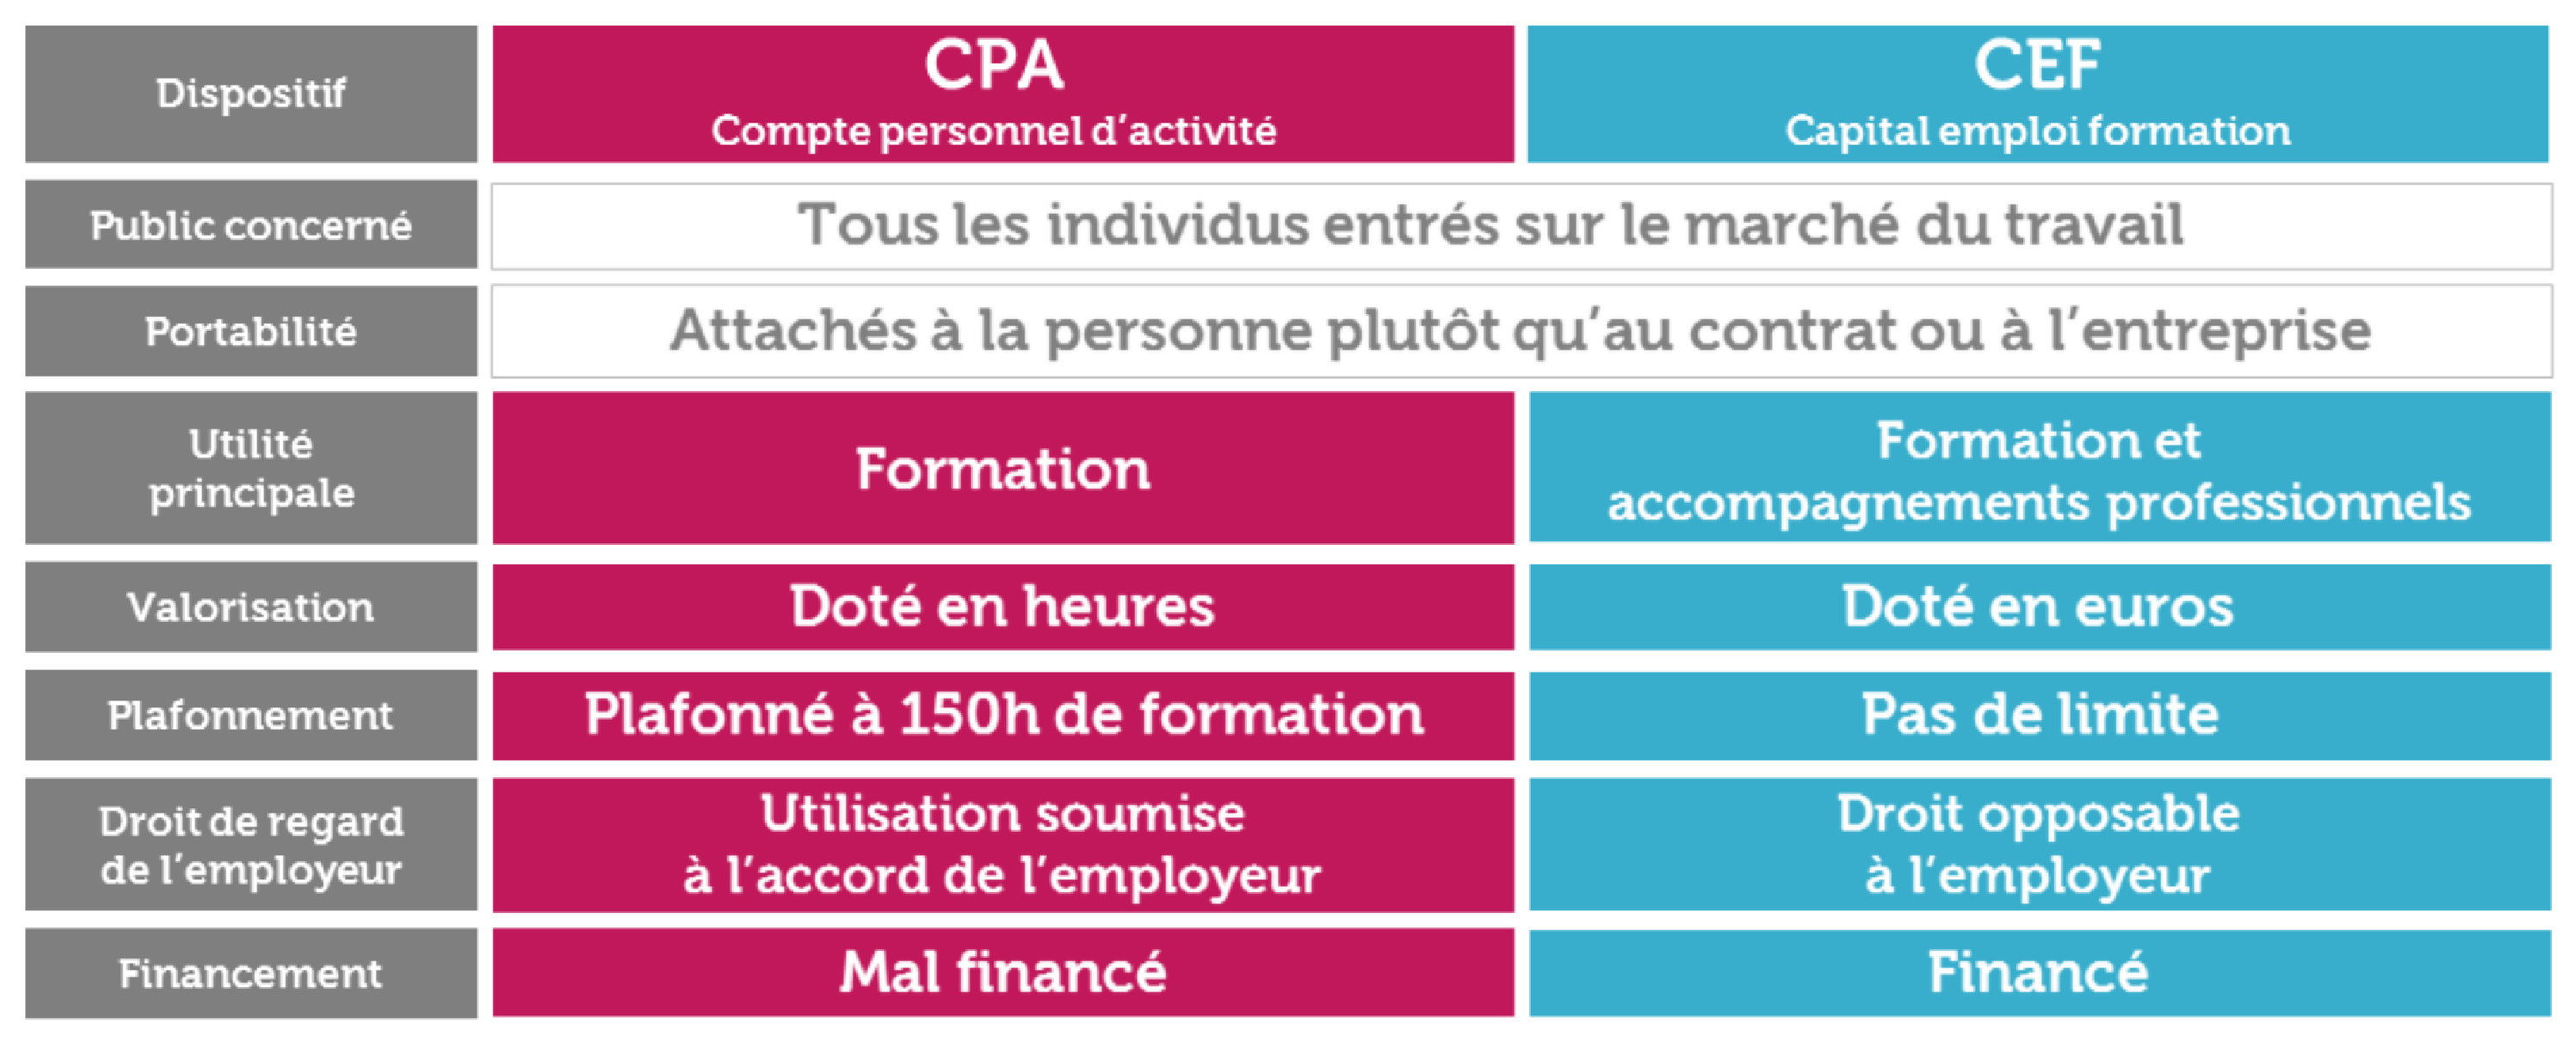 capital-emploi-formation